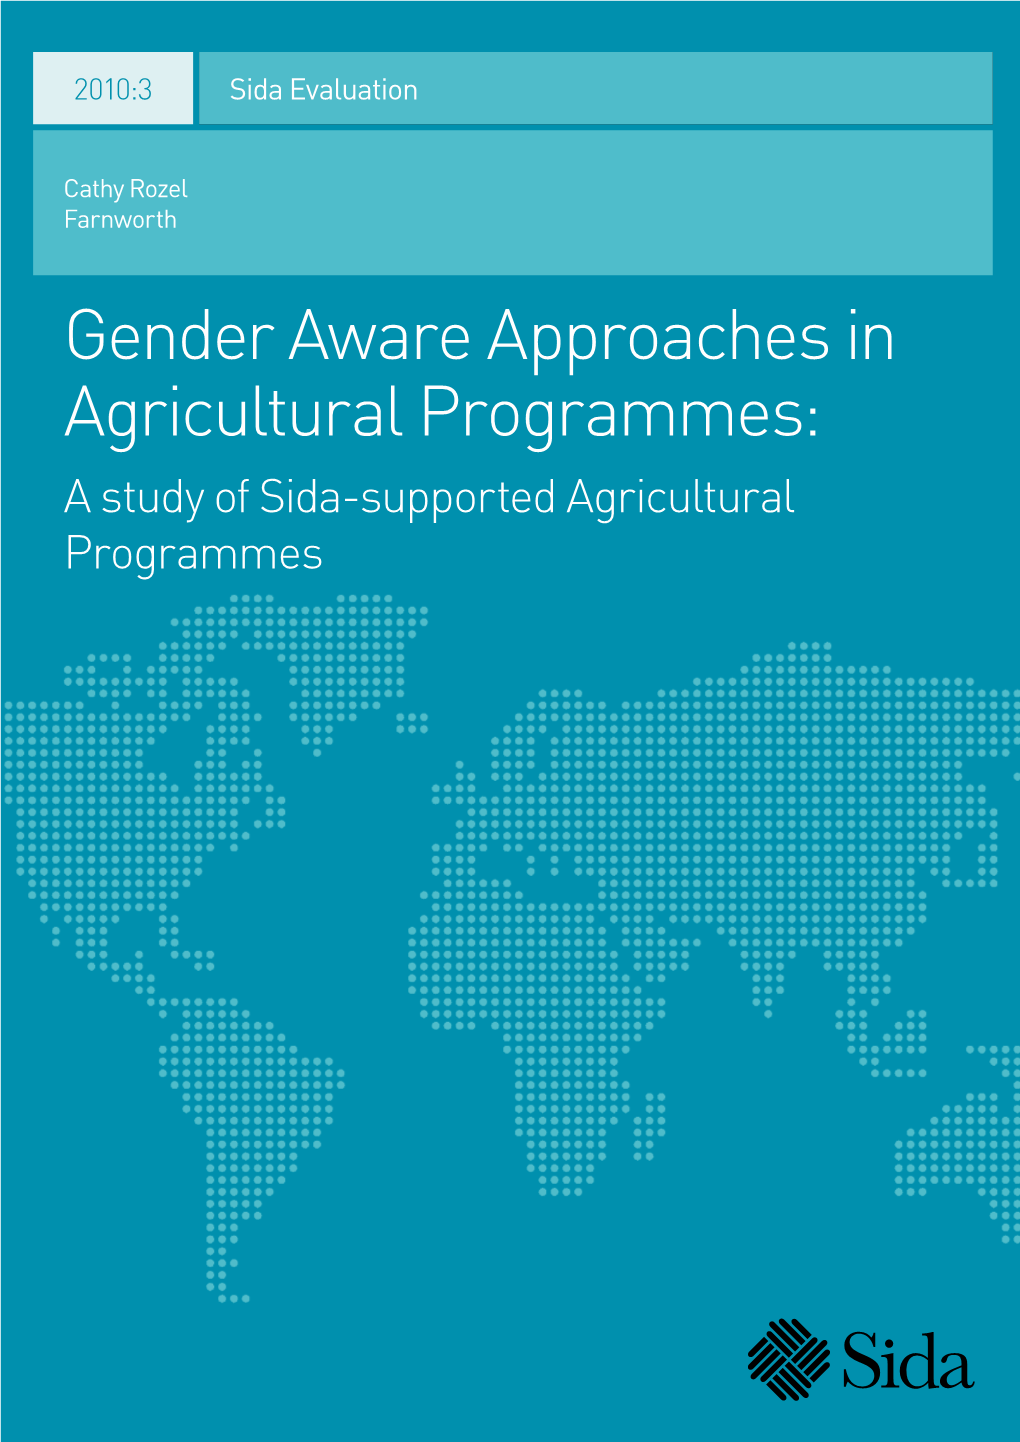 Gender Aware Approaches in Agricultural Programmes: a Study of Sida-Supported Agricultural Programmes